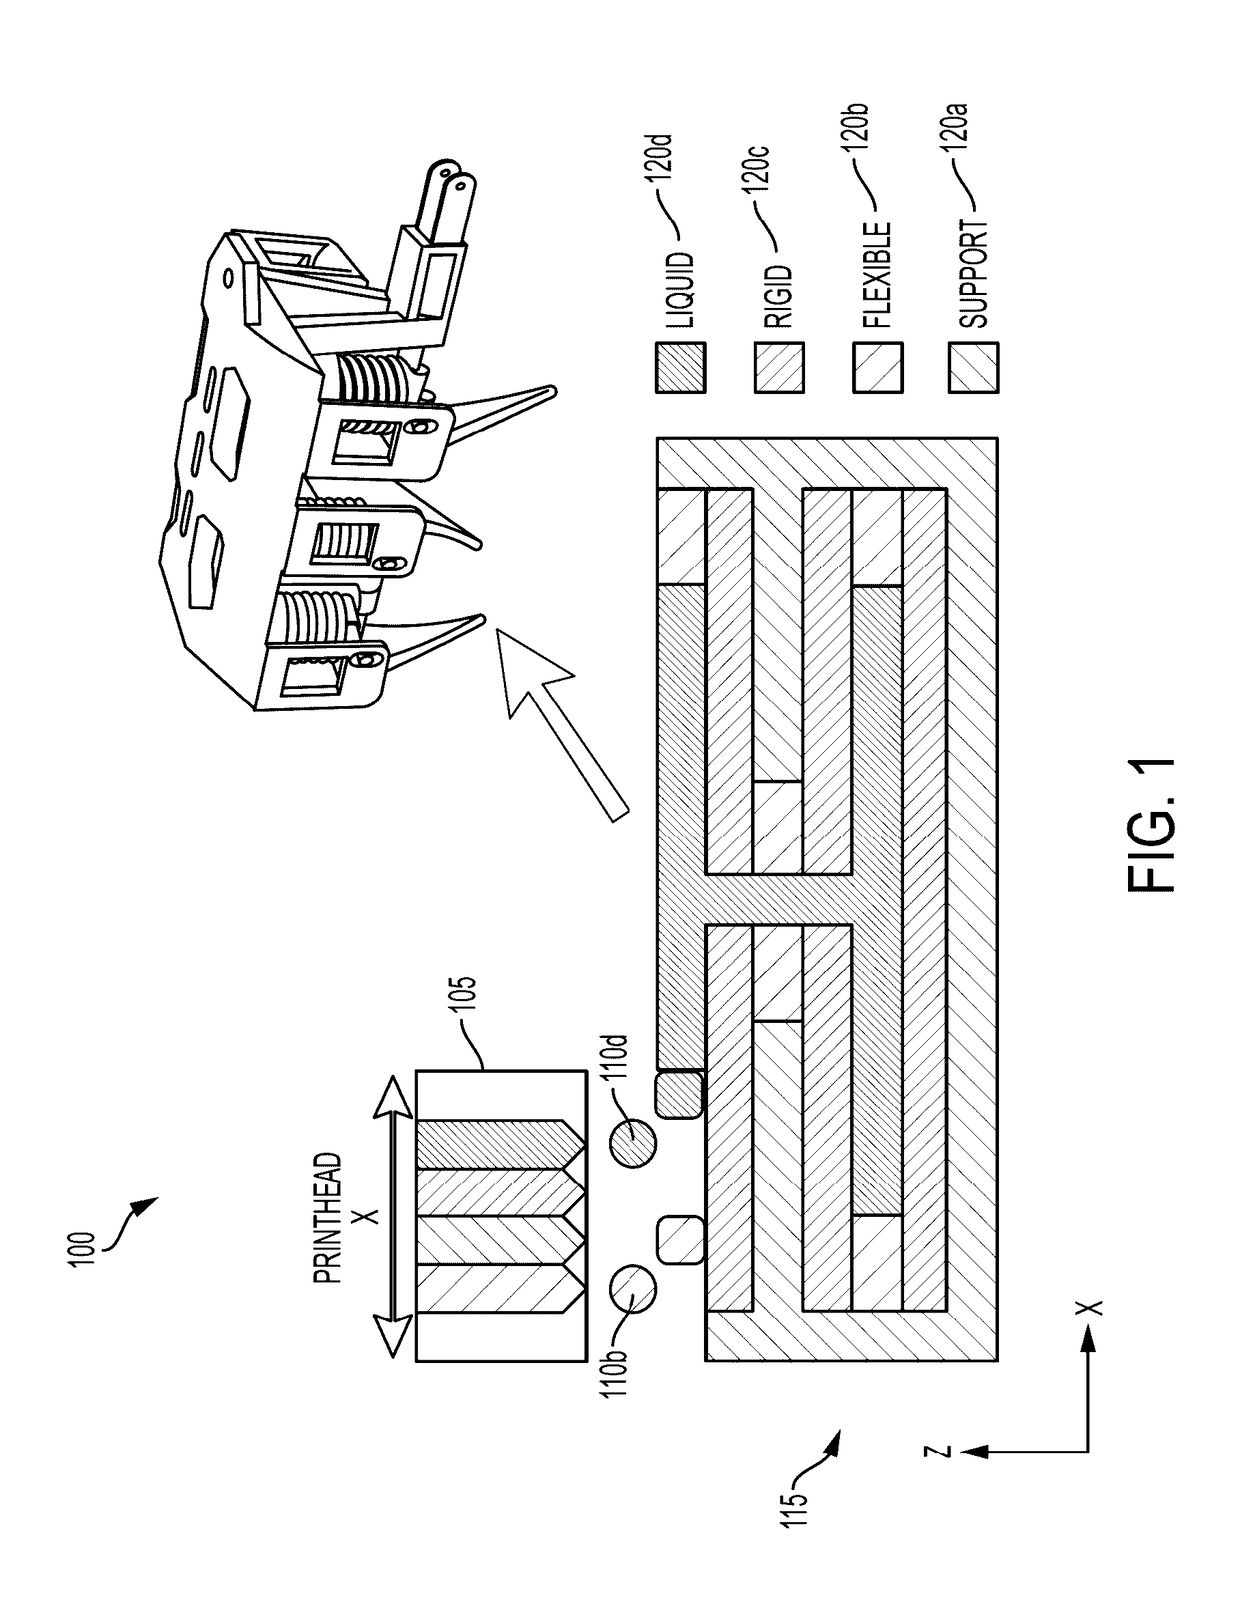 Actuatable Assemblies Fabricatable by Deposition of Solidifying and Non-Solidifying Materials